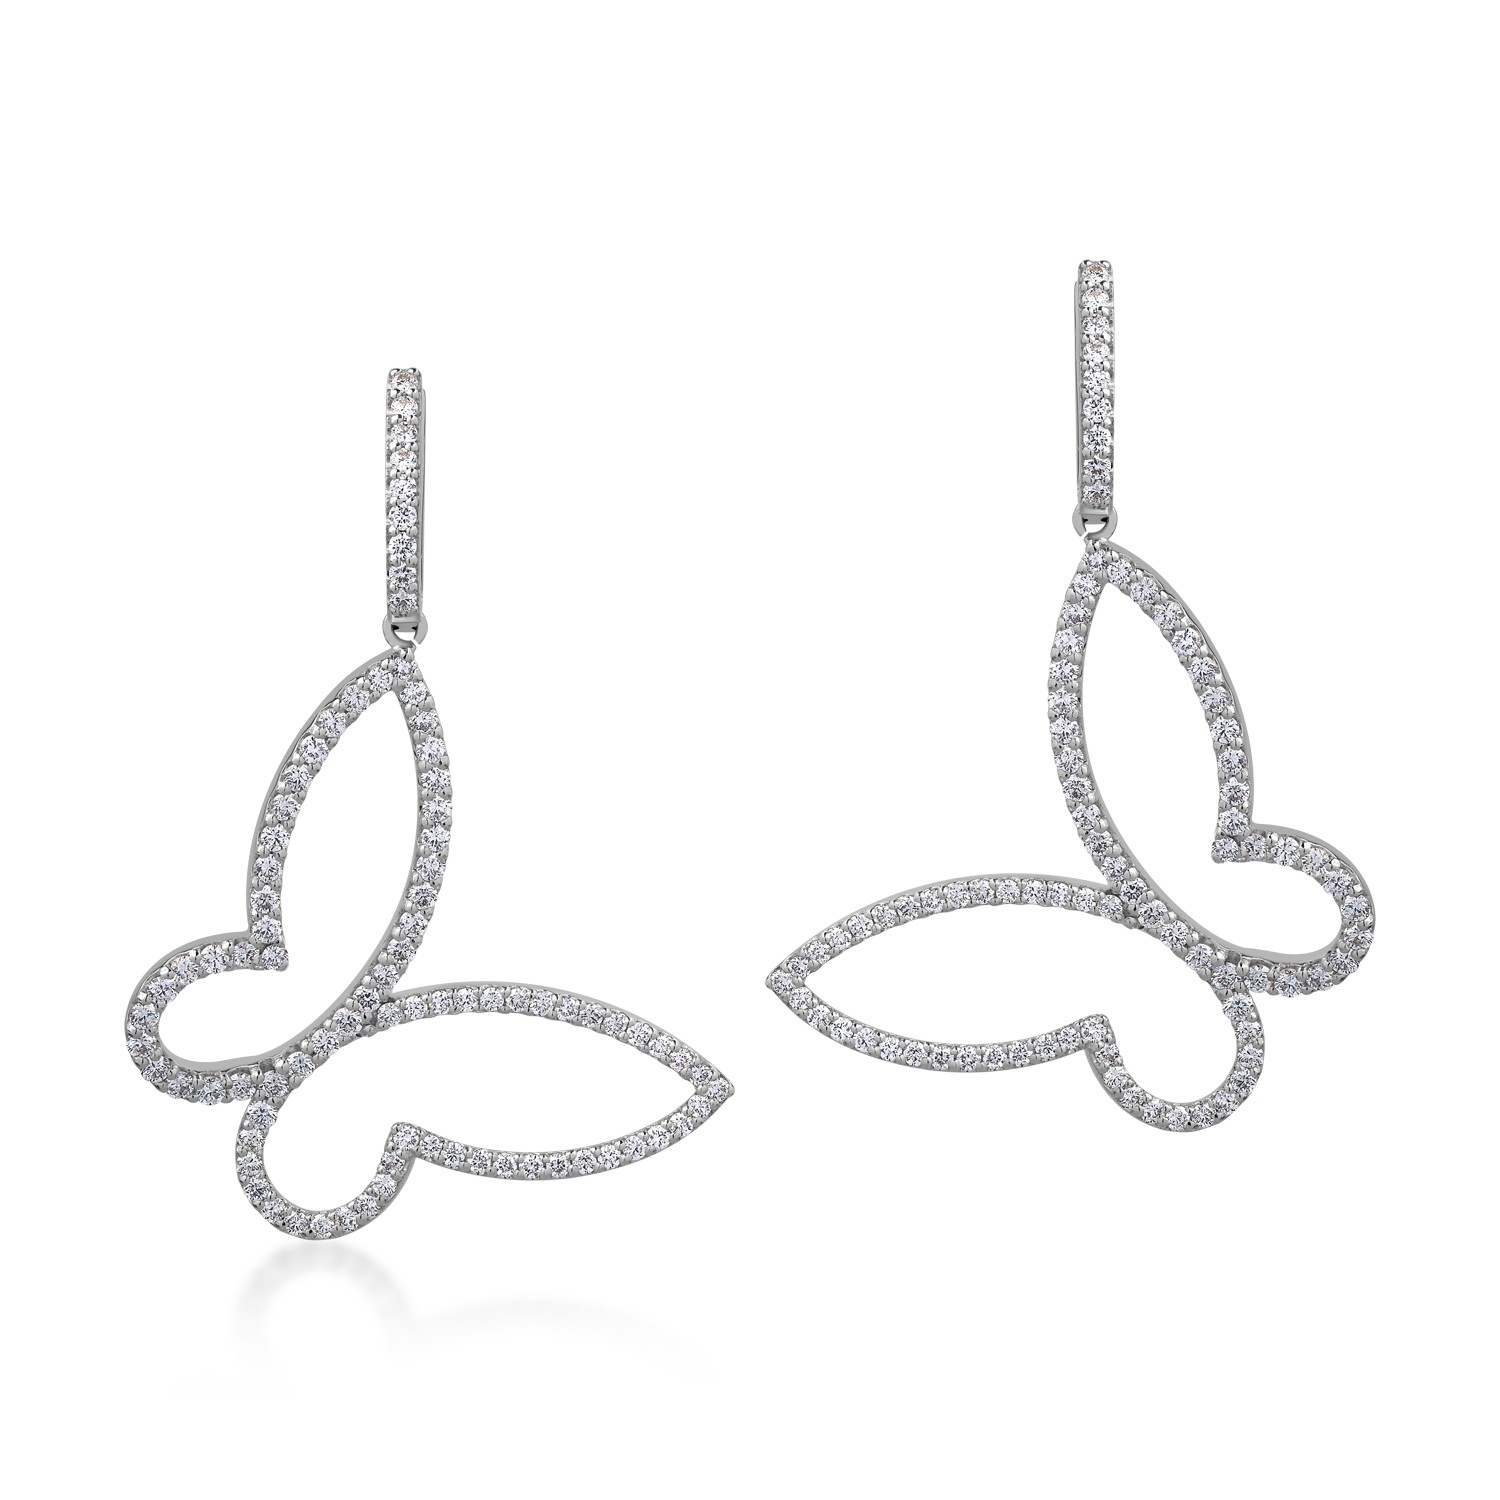 18K white gold earrings with 2.1ct diamonds